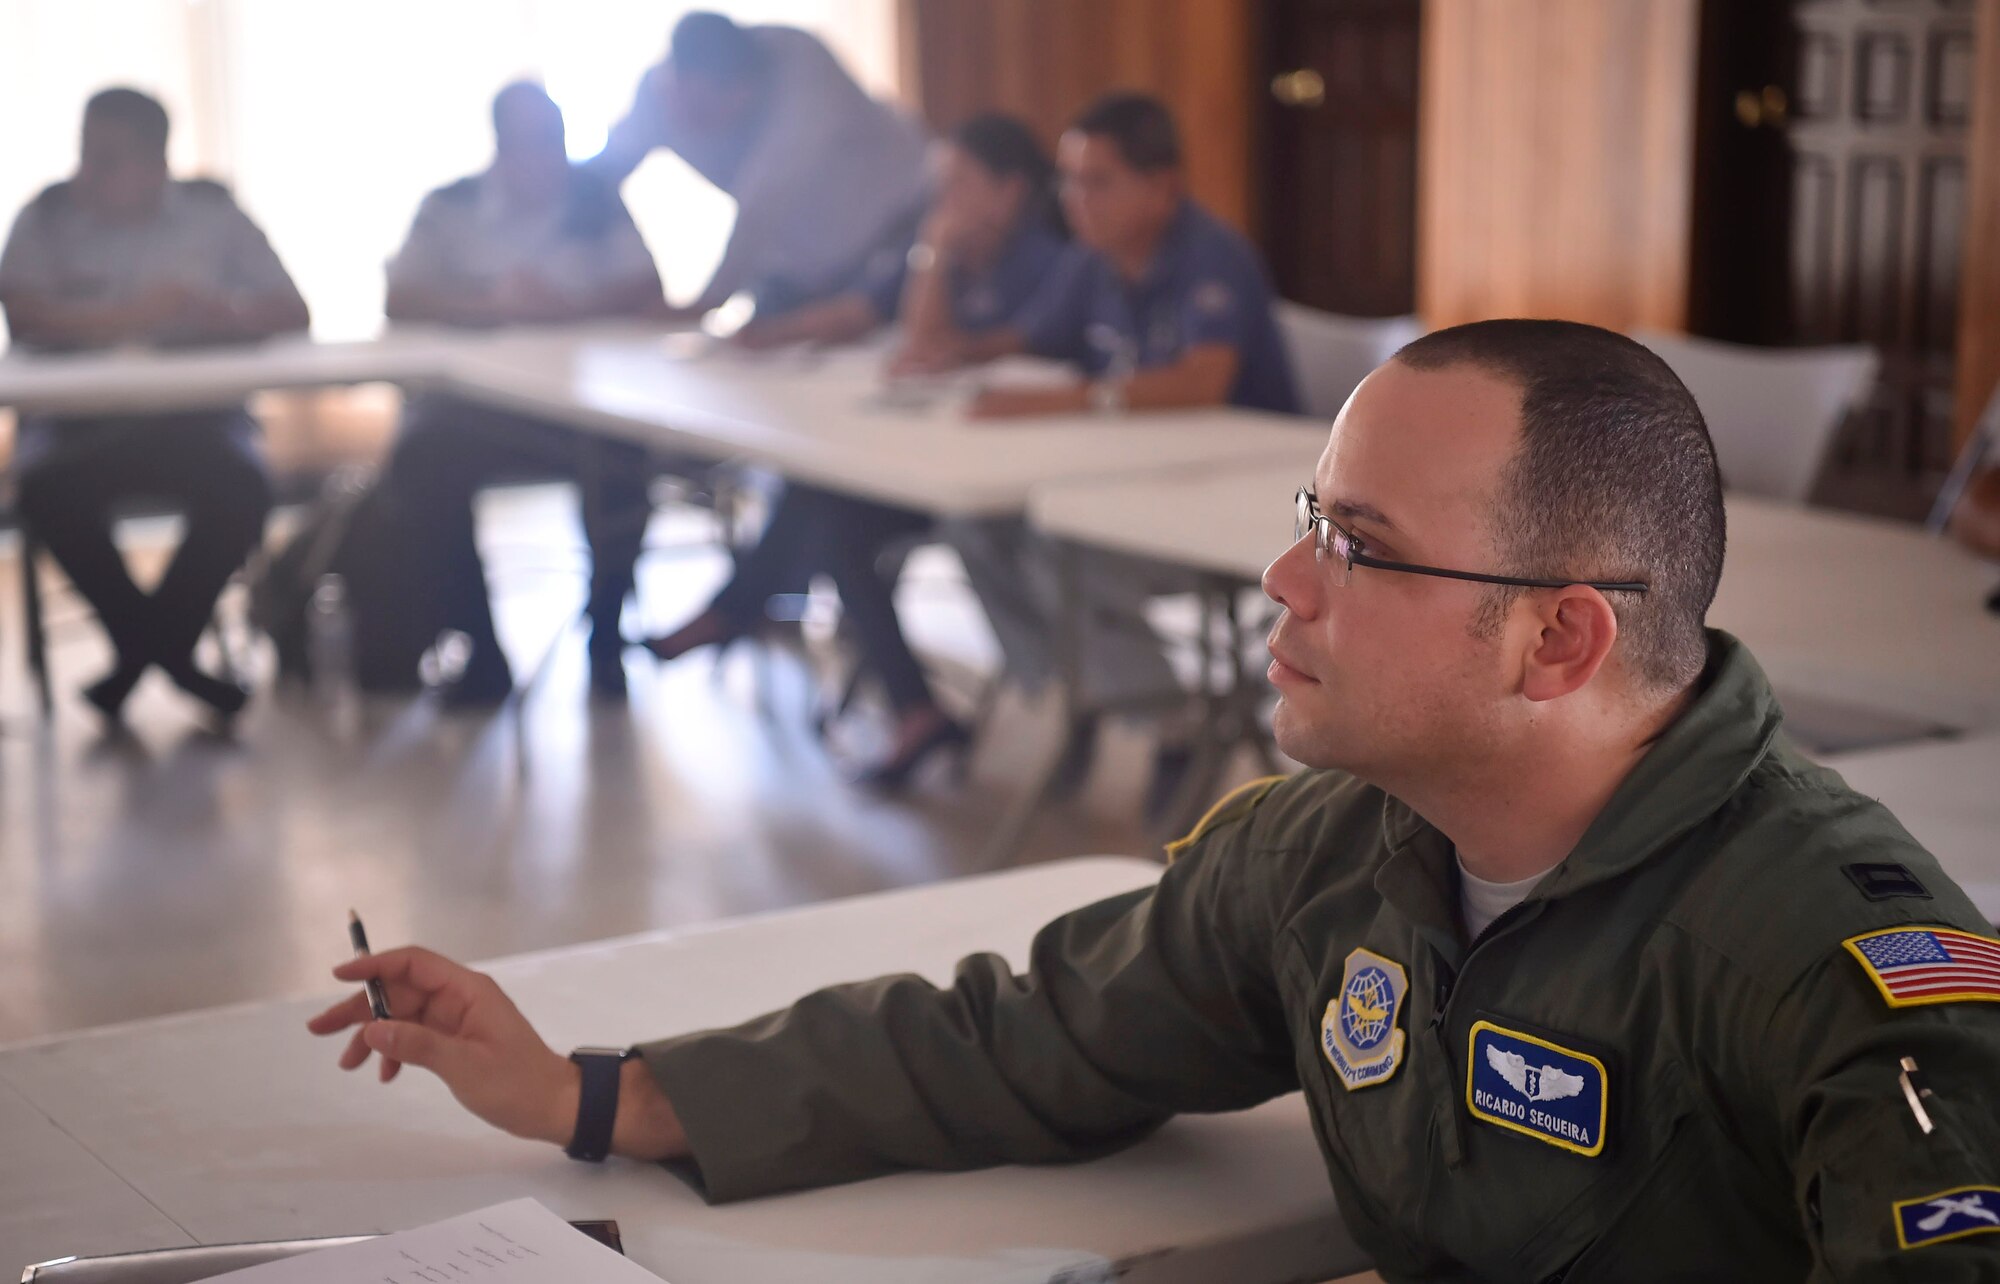 U.S. Air Force Capt. Ricardo Sequeira, 628th Medical Operations Support Squadron and 14th Airlift Squadron flight surgeon from Joint Base Charleston, South Carolina, participates in talks with members of the Honduran air force about flight medicine during an aerospace medicine subject matter expert exchange in Tegucigalpa, Honduras, April 4. The goal of the global health exchange is to share best practices, enhance relationships, and build partnership capacities.